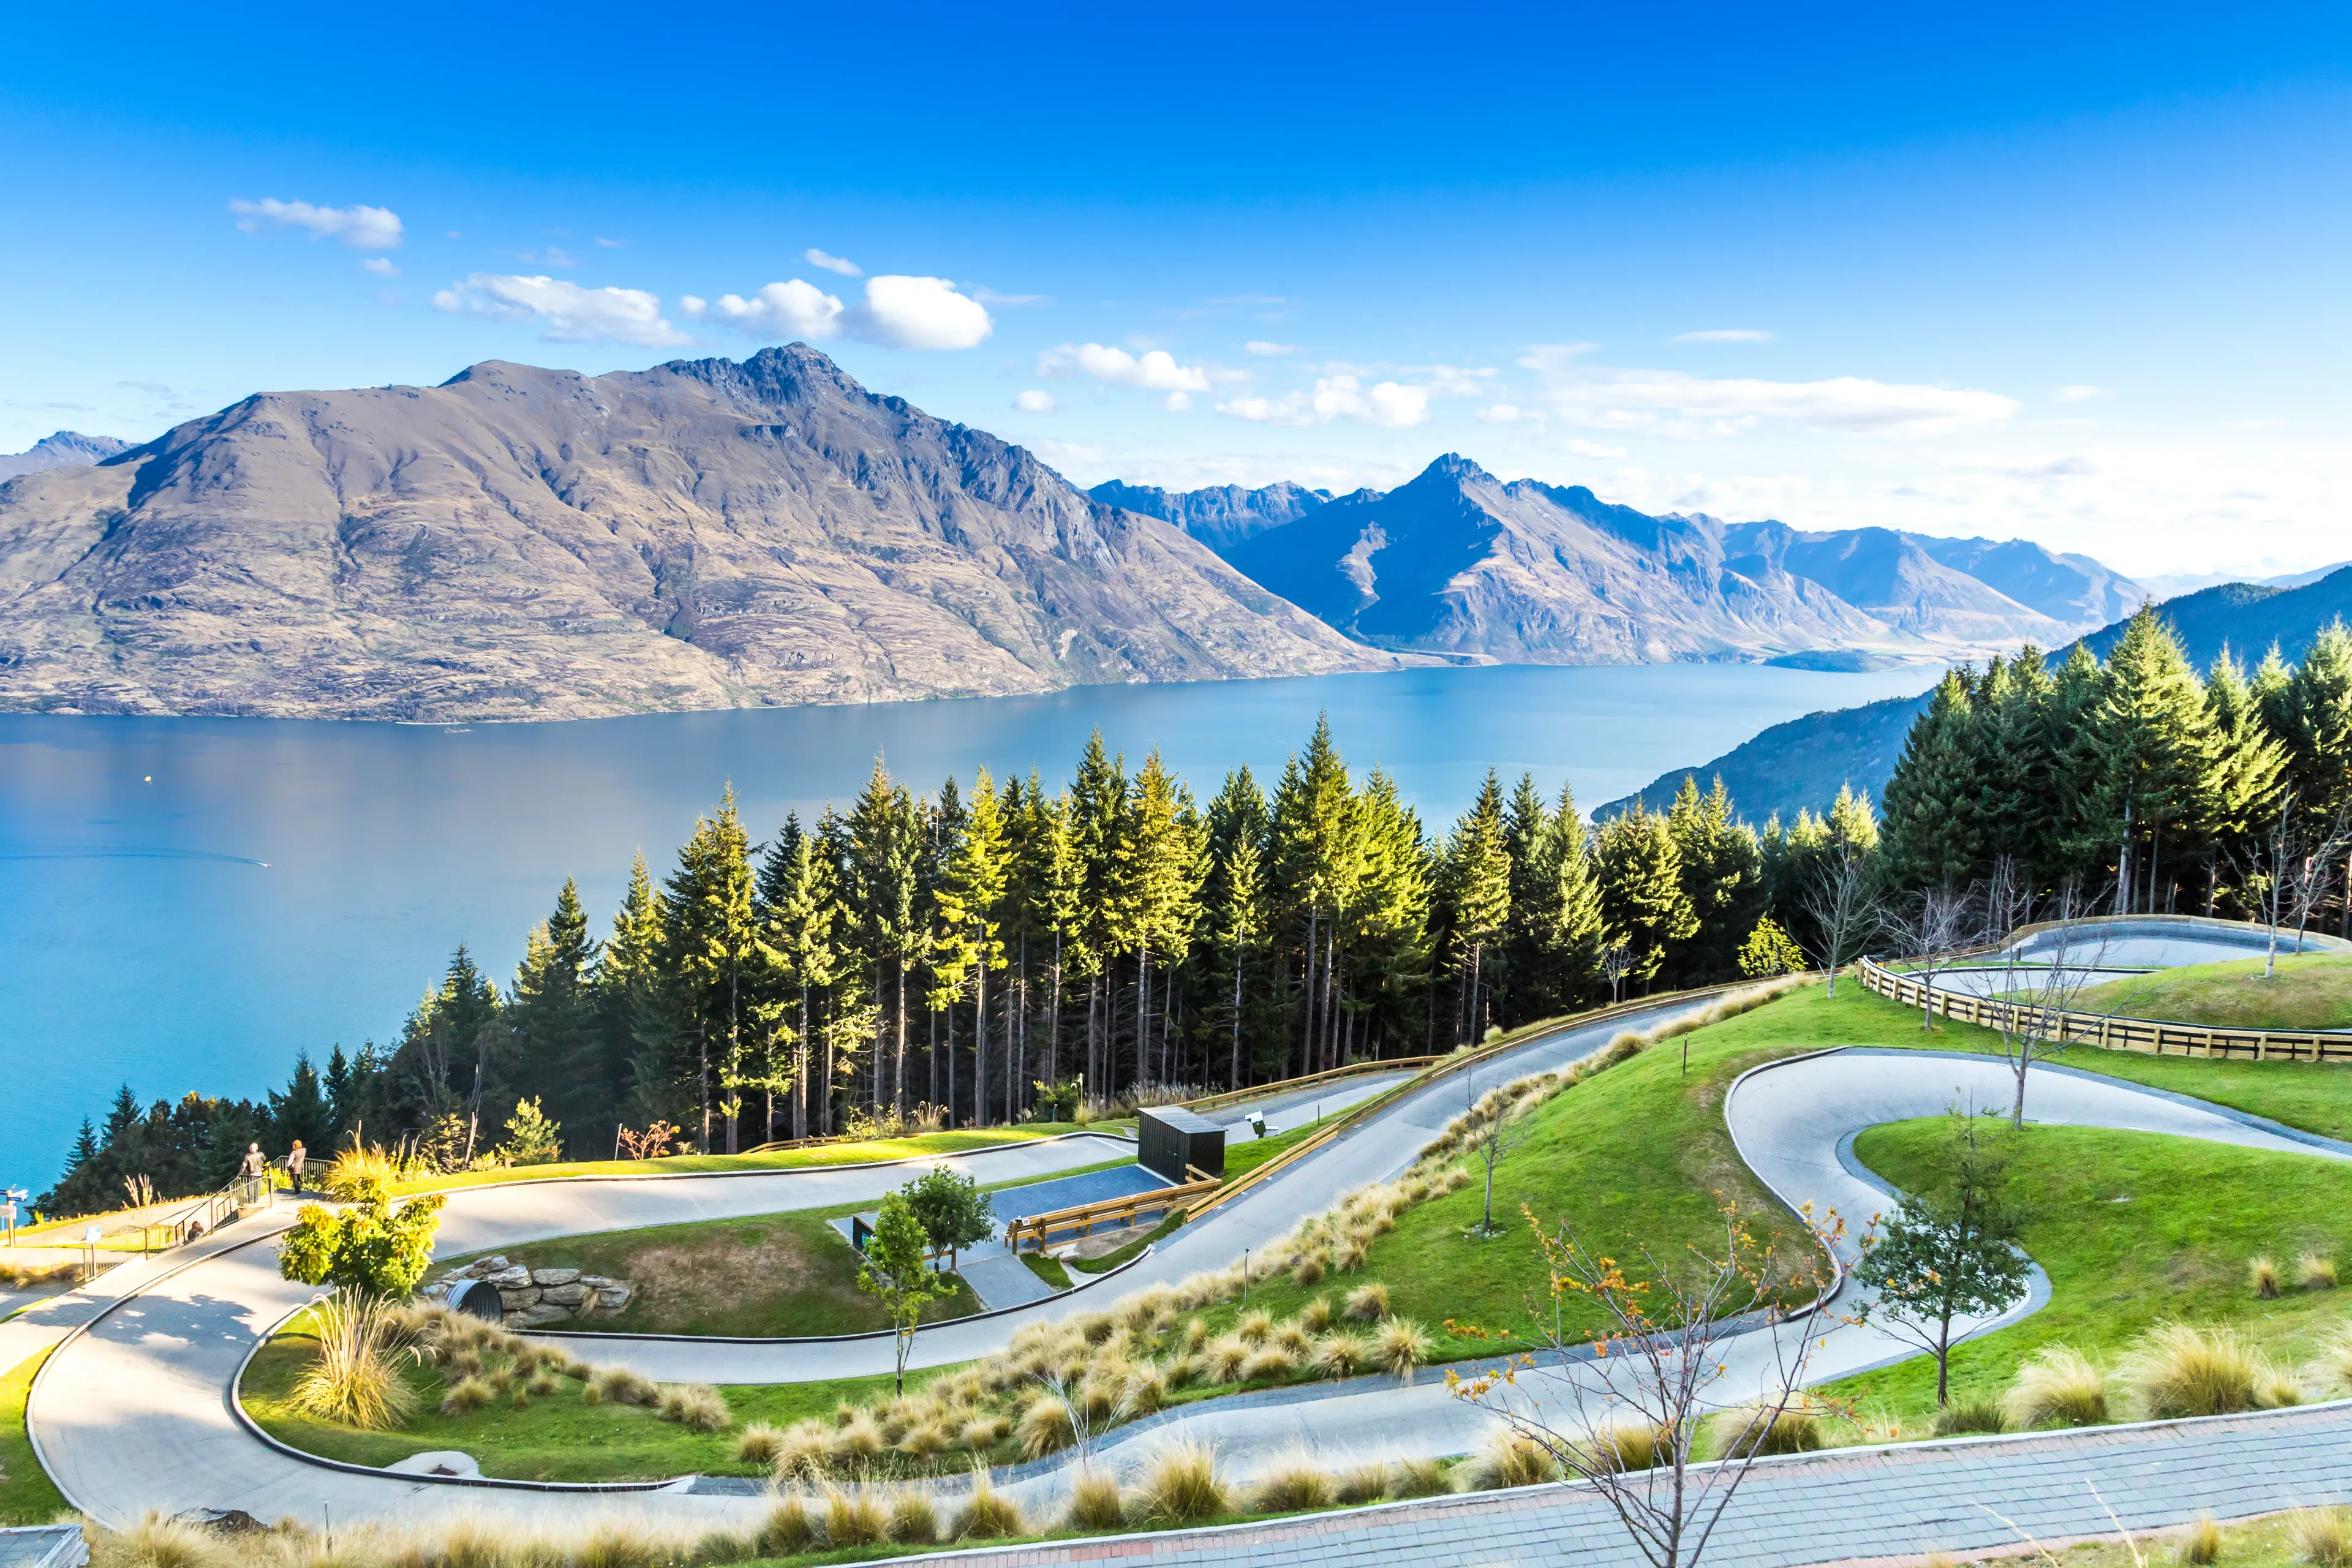 2-Day Solo Shopping & Sightseeing Adventure in Queenstown NZ